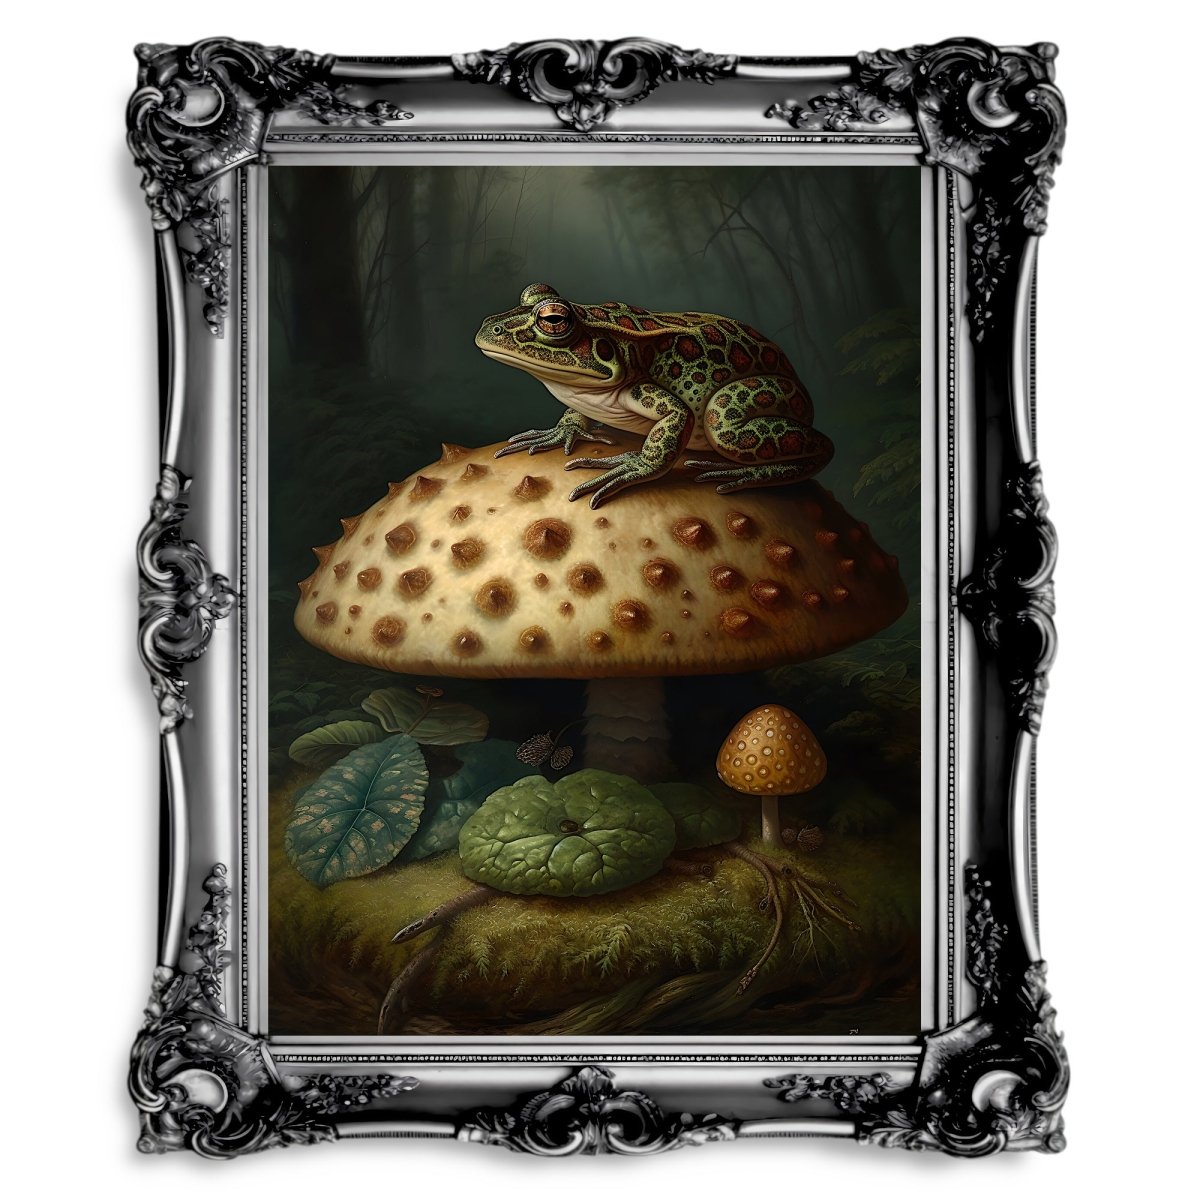 Toad Wall Poster, Japanese Art Style Illustration, Frog Wall Decoration,  Japanese Wall Poster to Frame 